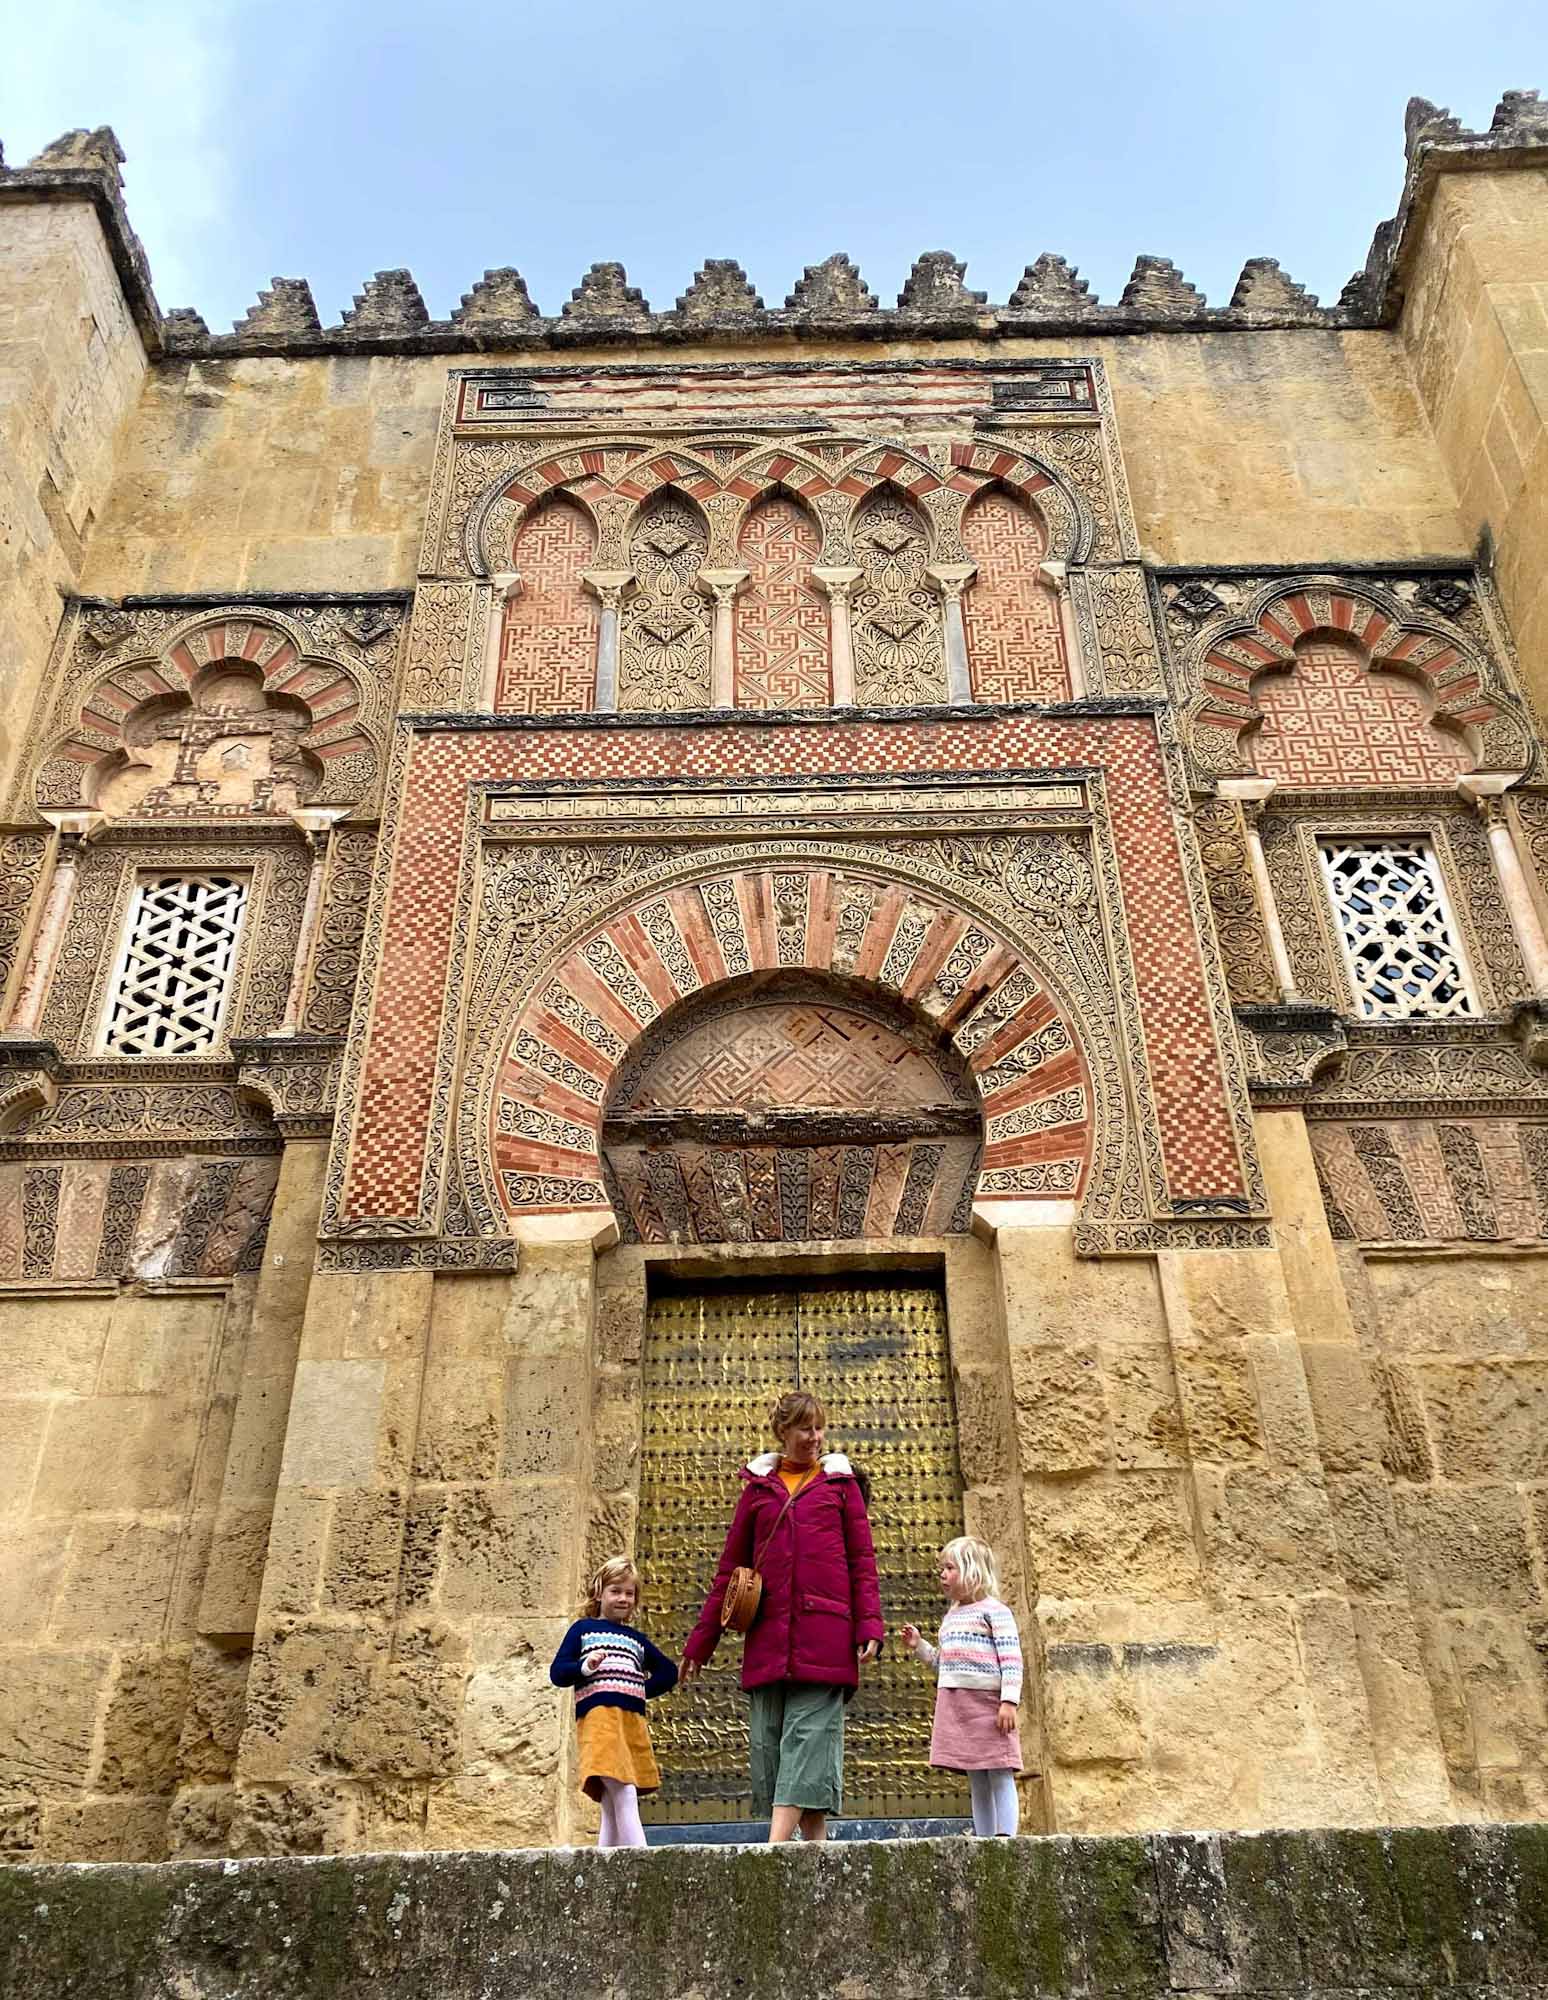 Mother with 2 daughters stood in front of a decorative, Moorish-design stone building